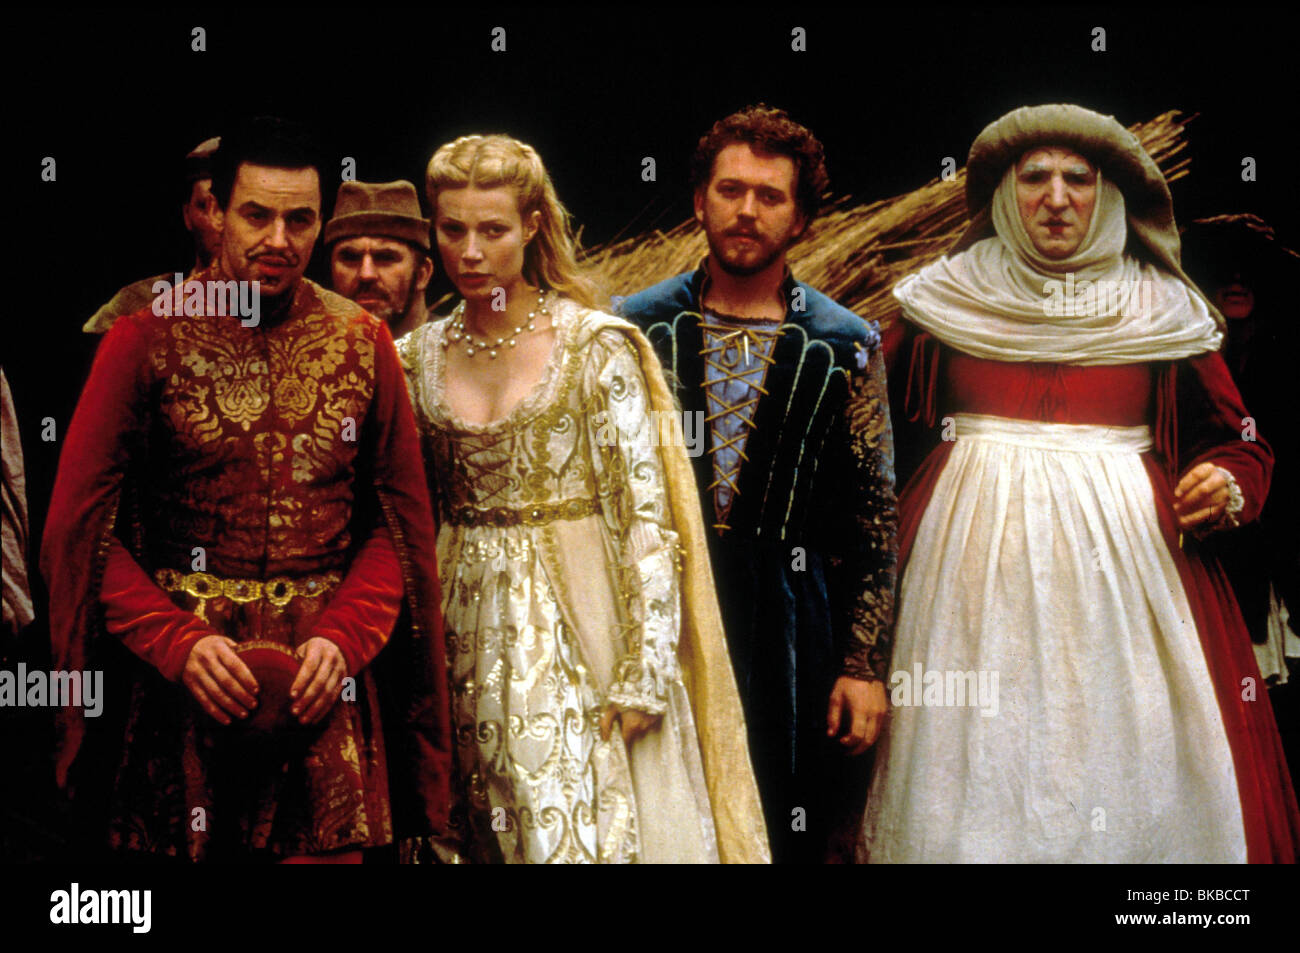 SHAKESPEARE IN LOVE (1999) Gwyneth Paltrow, JIM CARTER SHIL 158 Banque D'Images